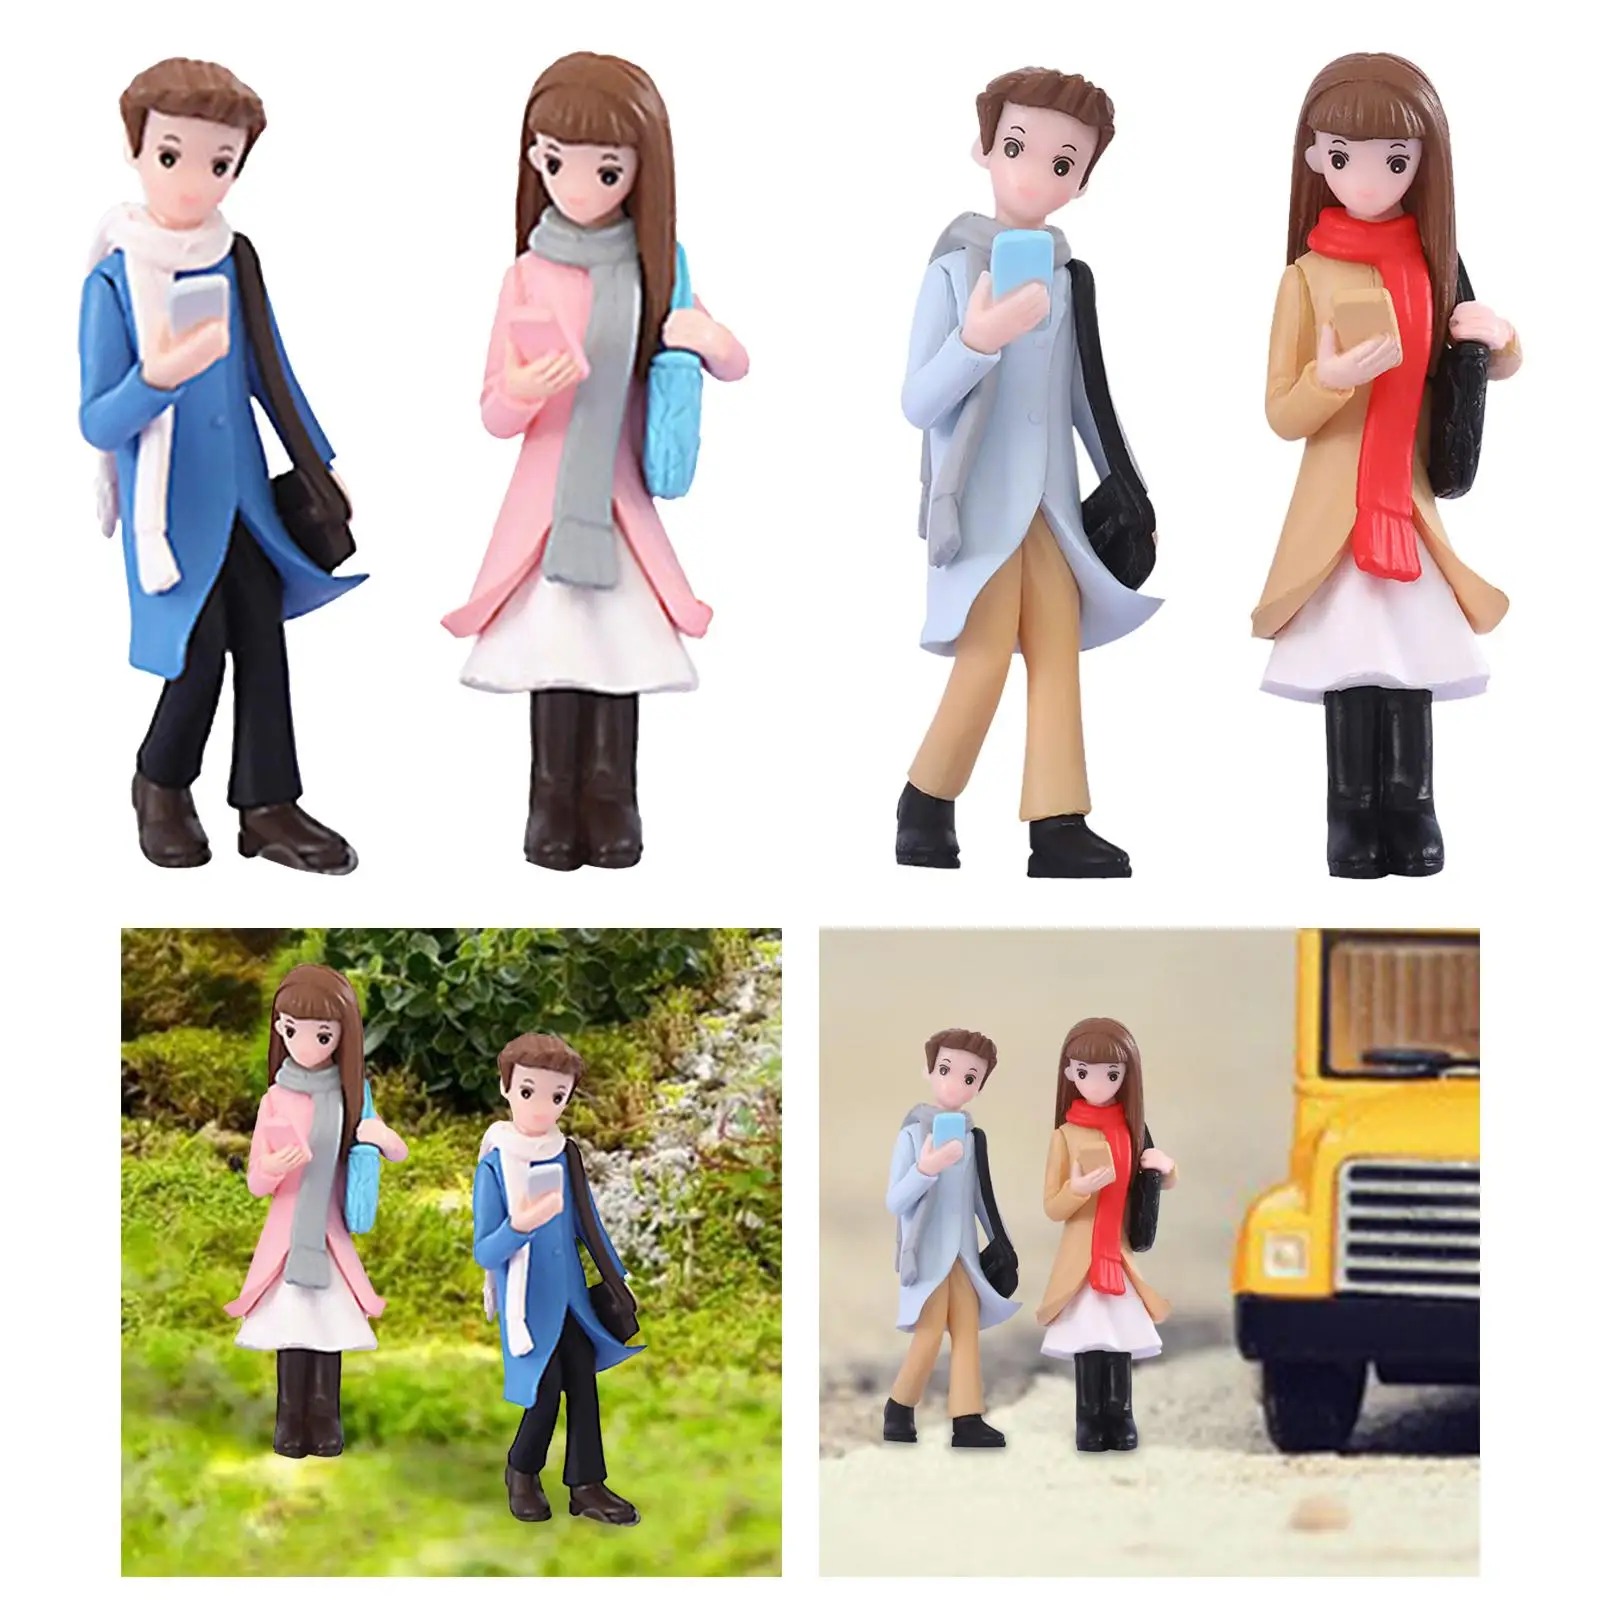 Phone Couple Collection People Figurines Set Sand Table Ornament for Photography Props Micro Landscapes Dollhouse Accessories